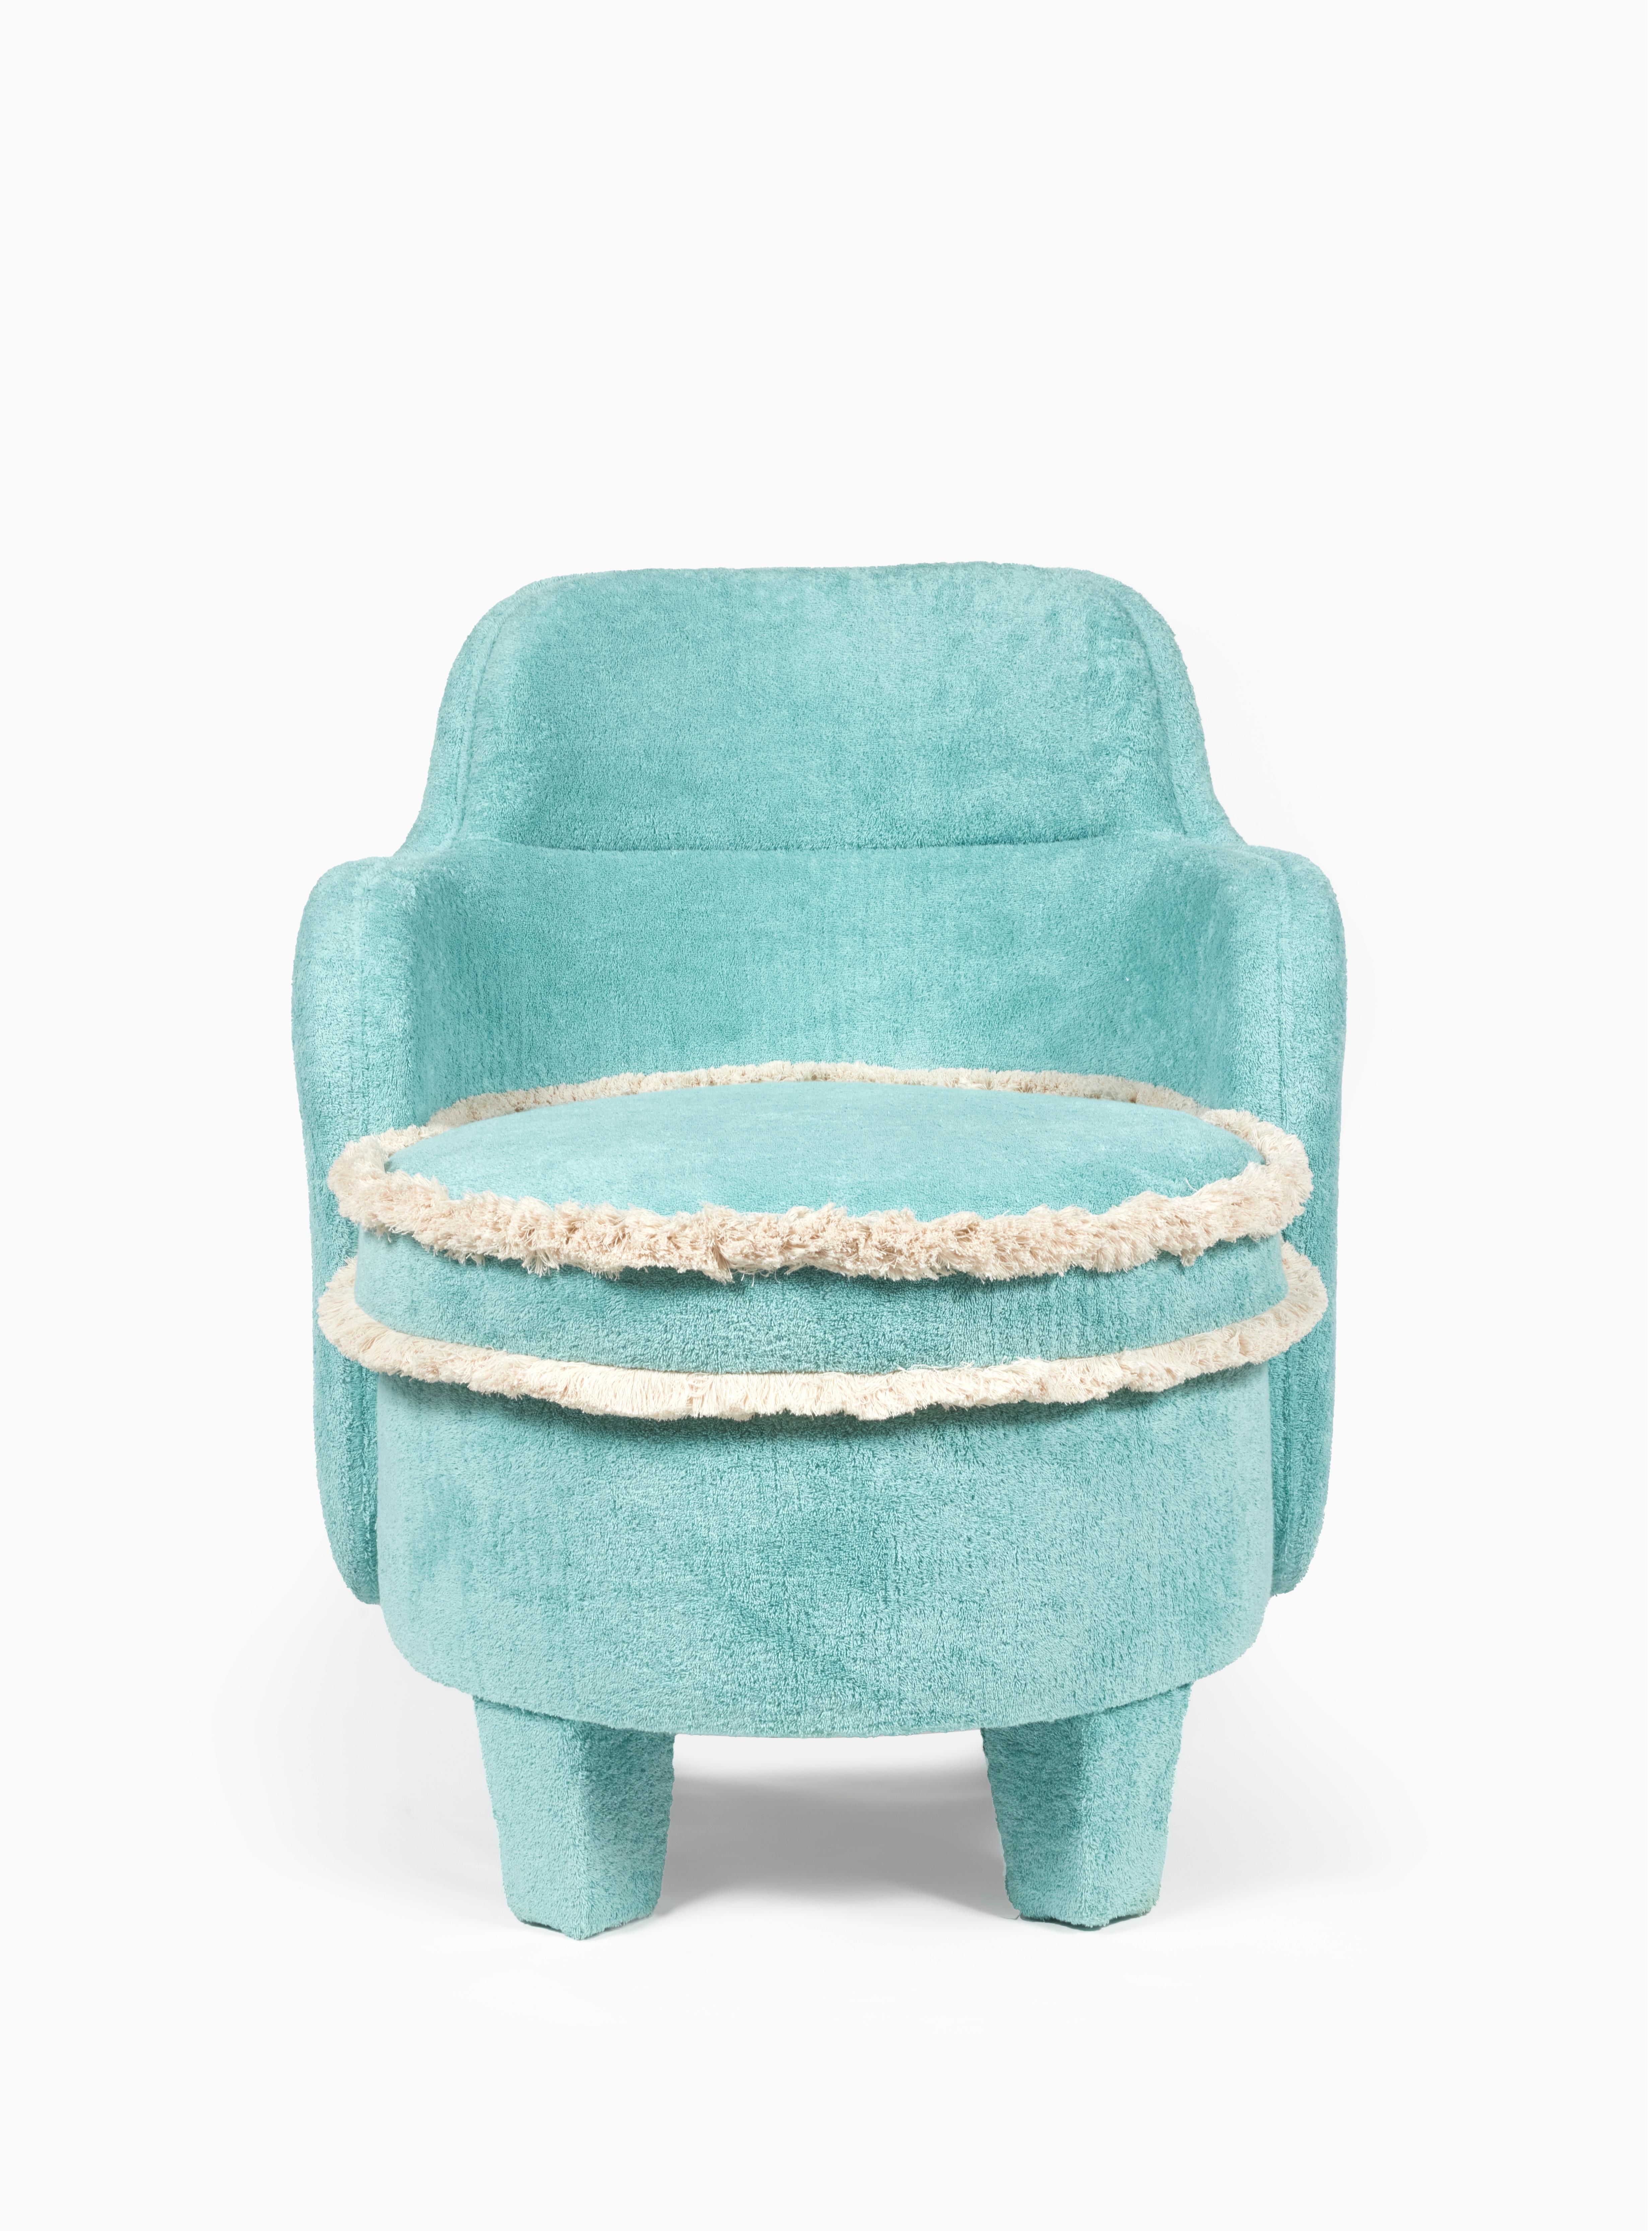 The Baba armchair was designed and imagined for a residential project in Paris. 
Its iconic design was inspired by the floral shapes of 70s furniture.
The size of this piece fits perfectly with a small area like angles of a bathroom or a bedroom.